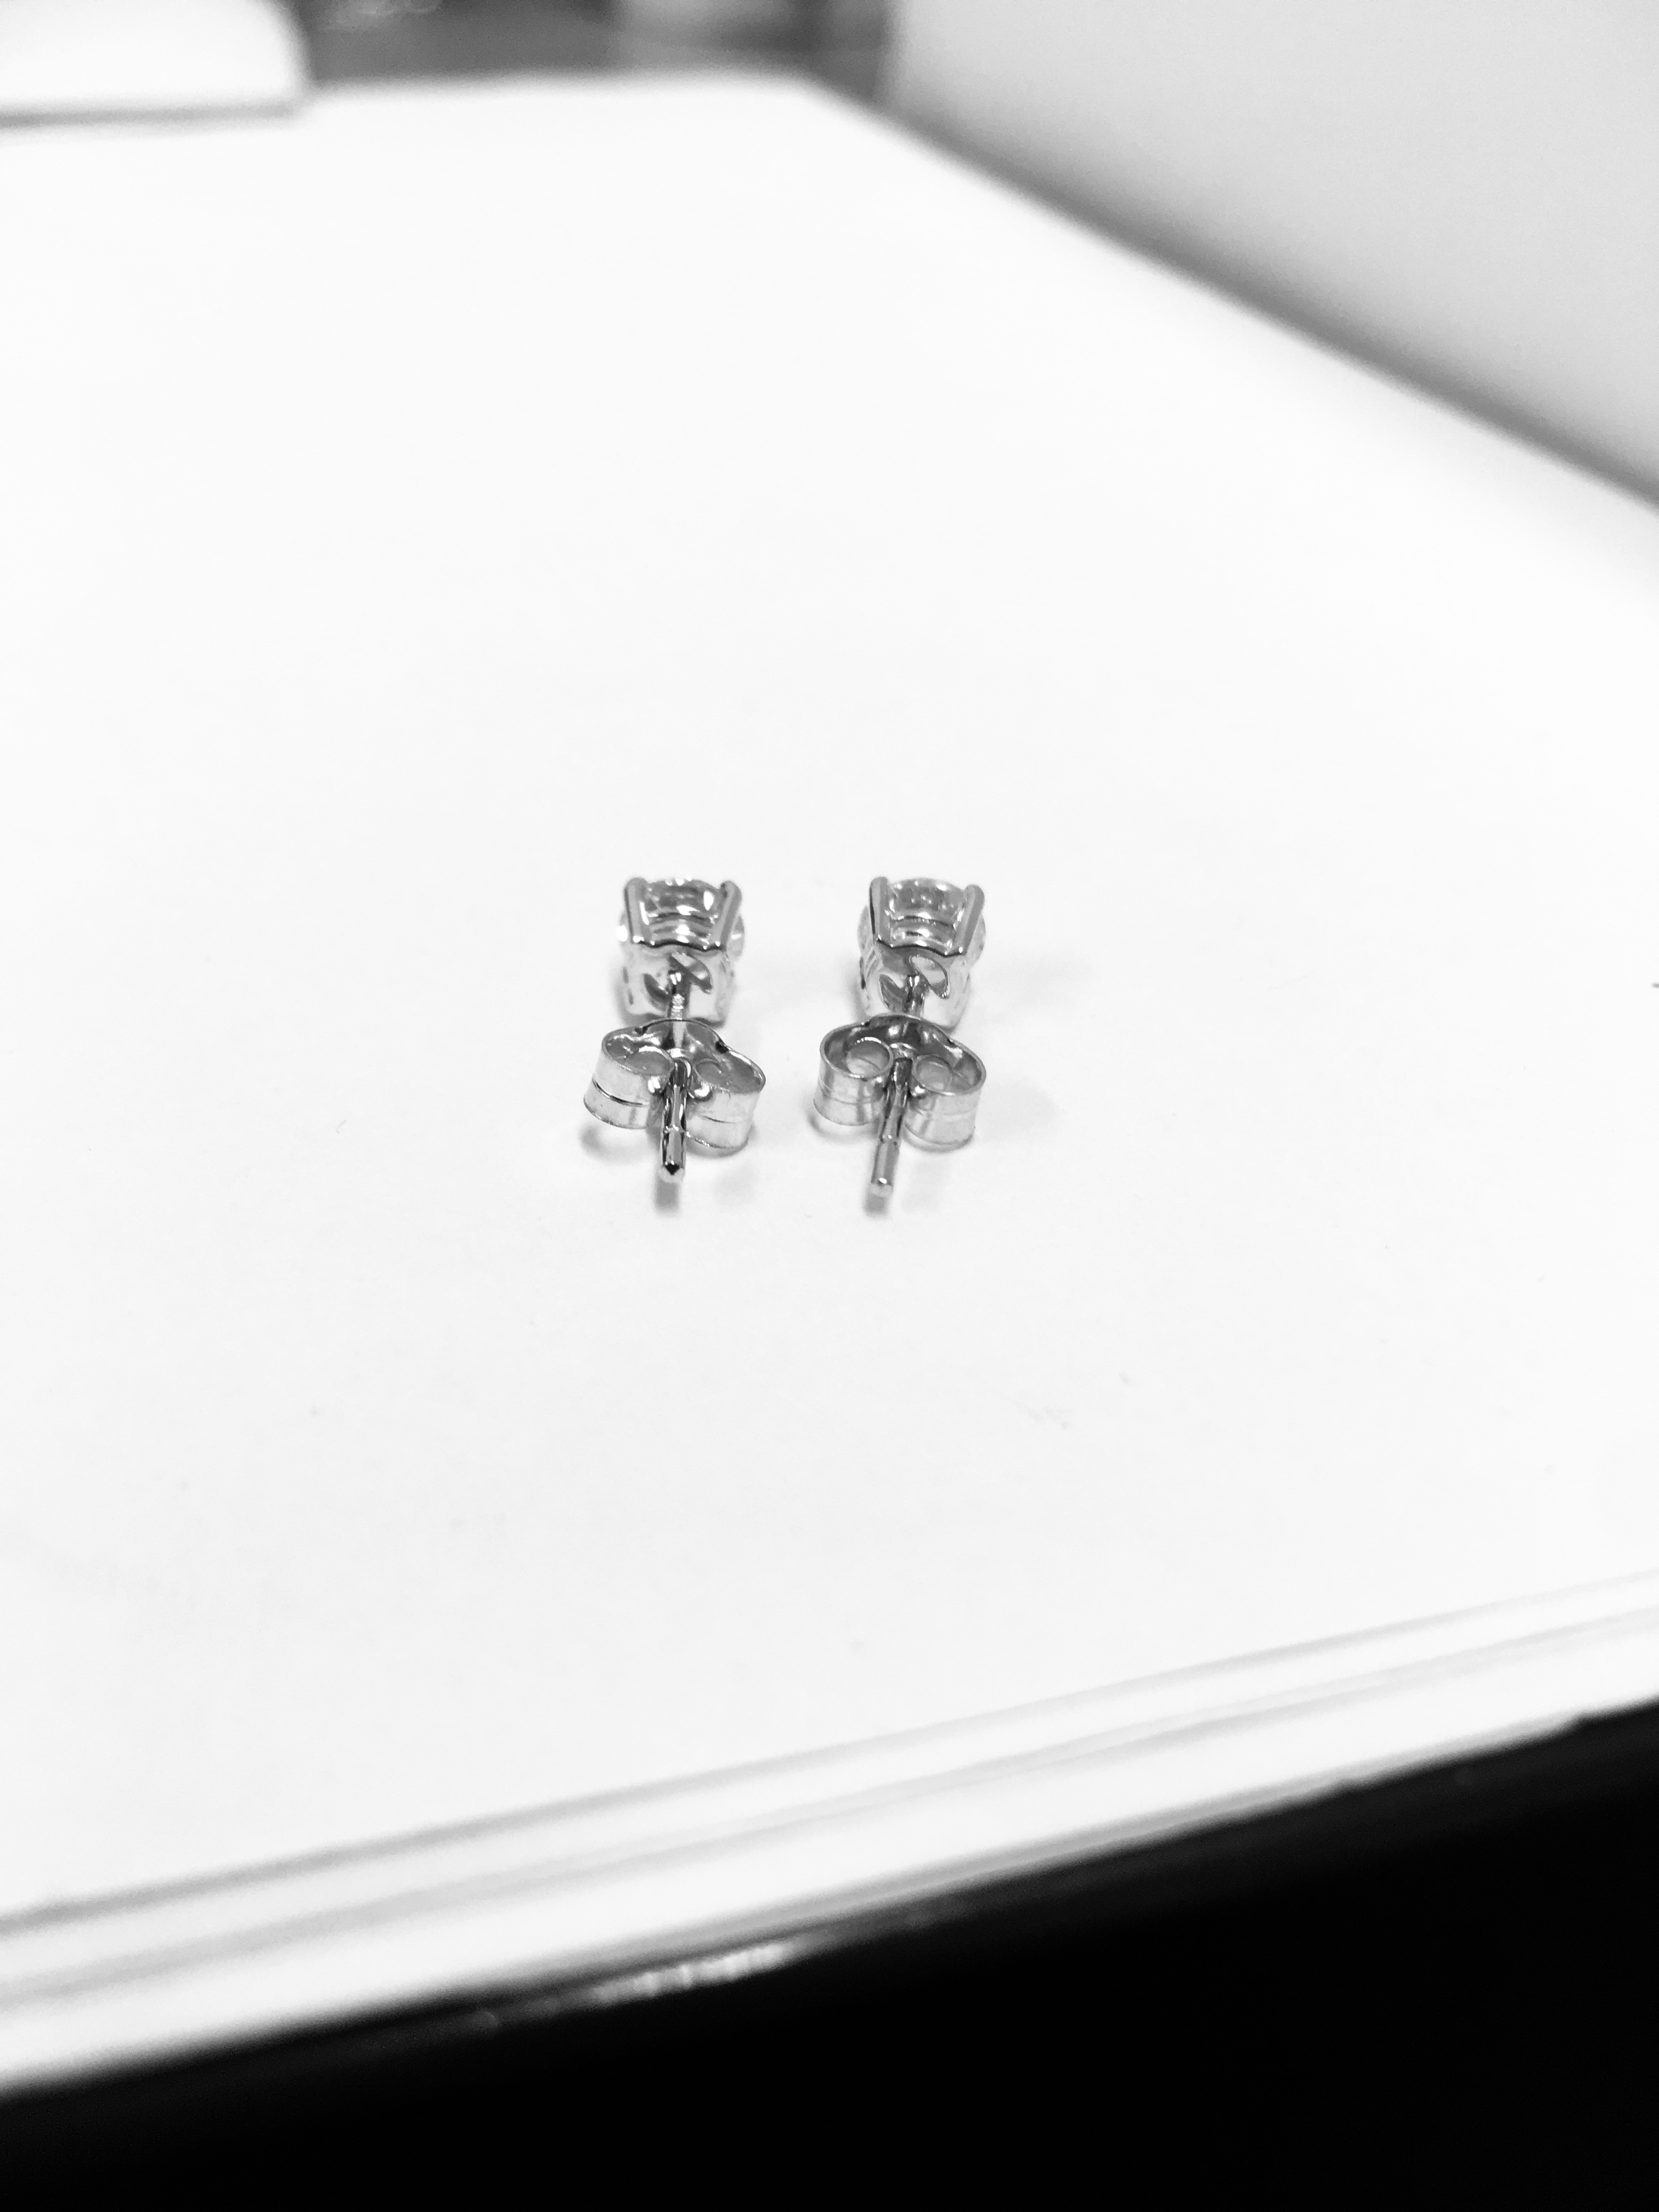 2.00ct Diamond solitaire earrings set with brilliant cut diamonds - Image 16 of 28